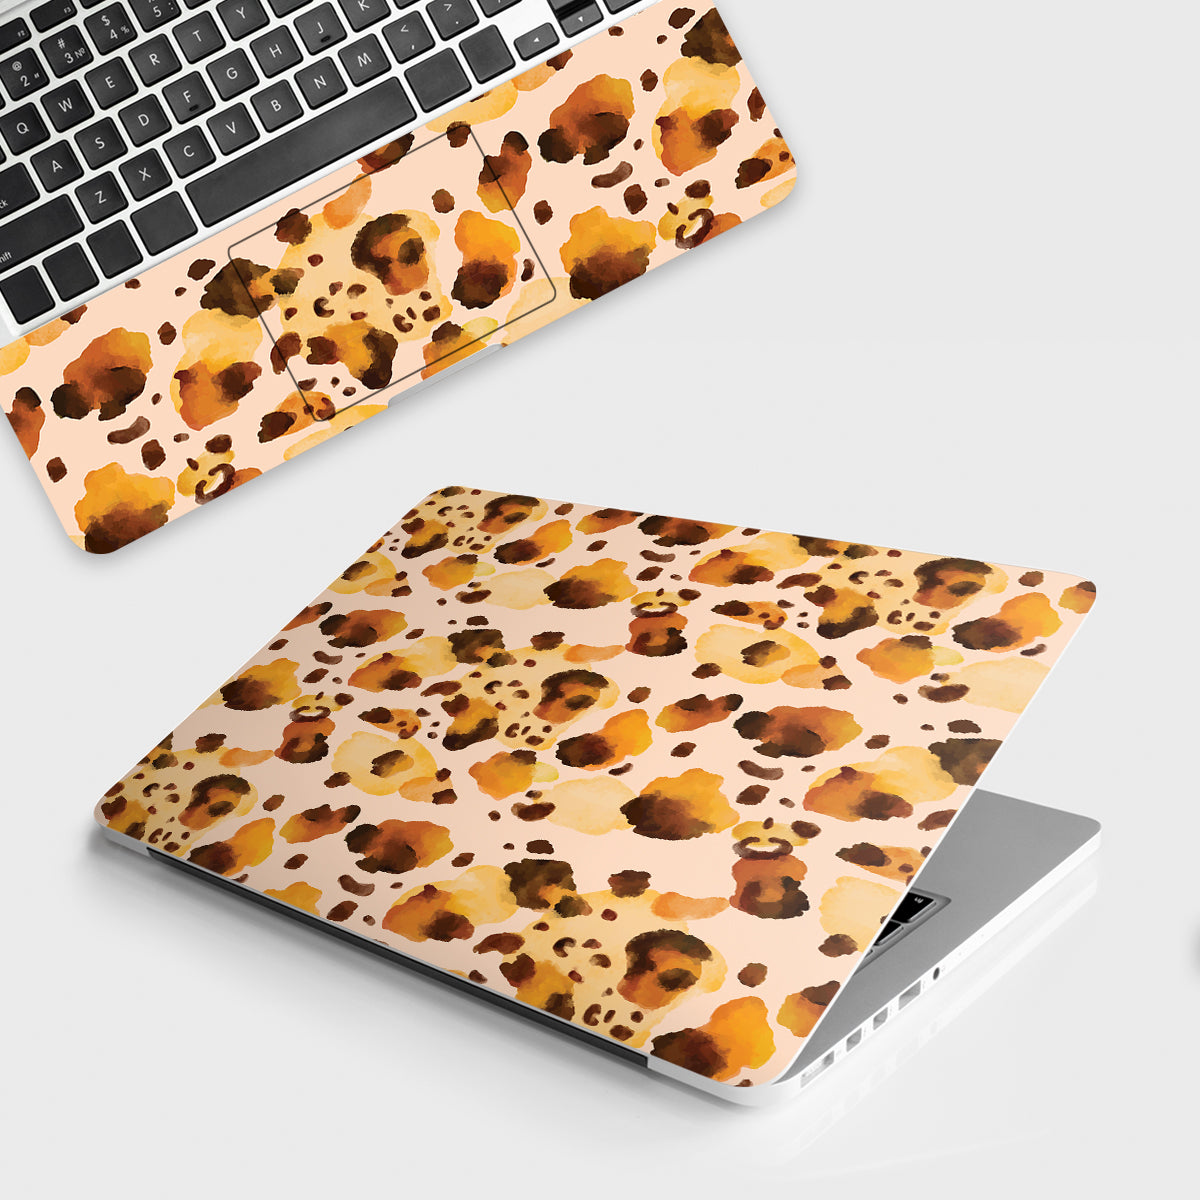 Fomo Store Laptop Skins Miscellaneous Brown Spotted